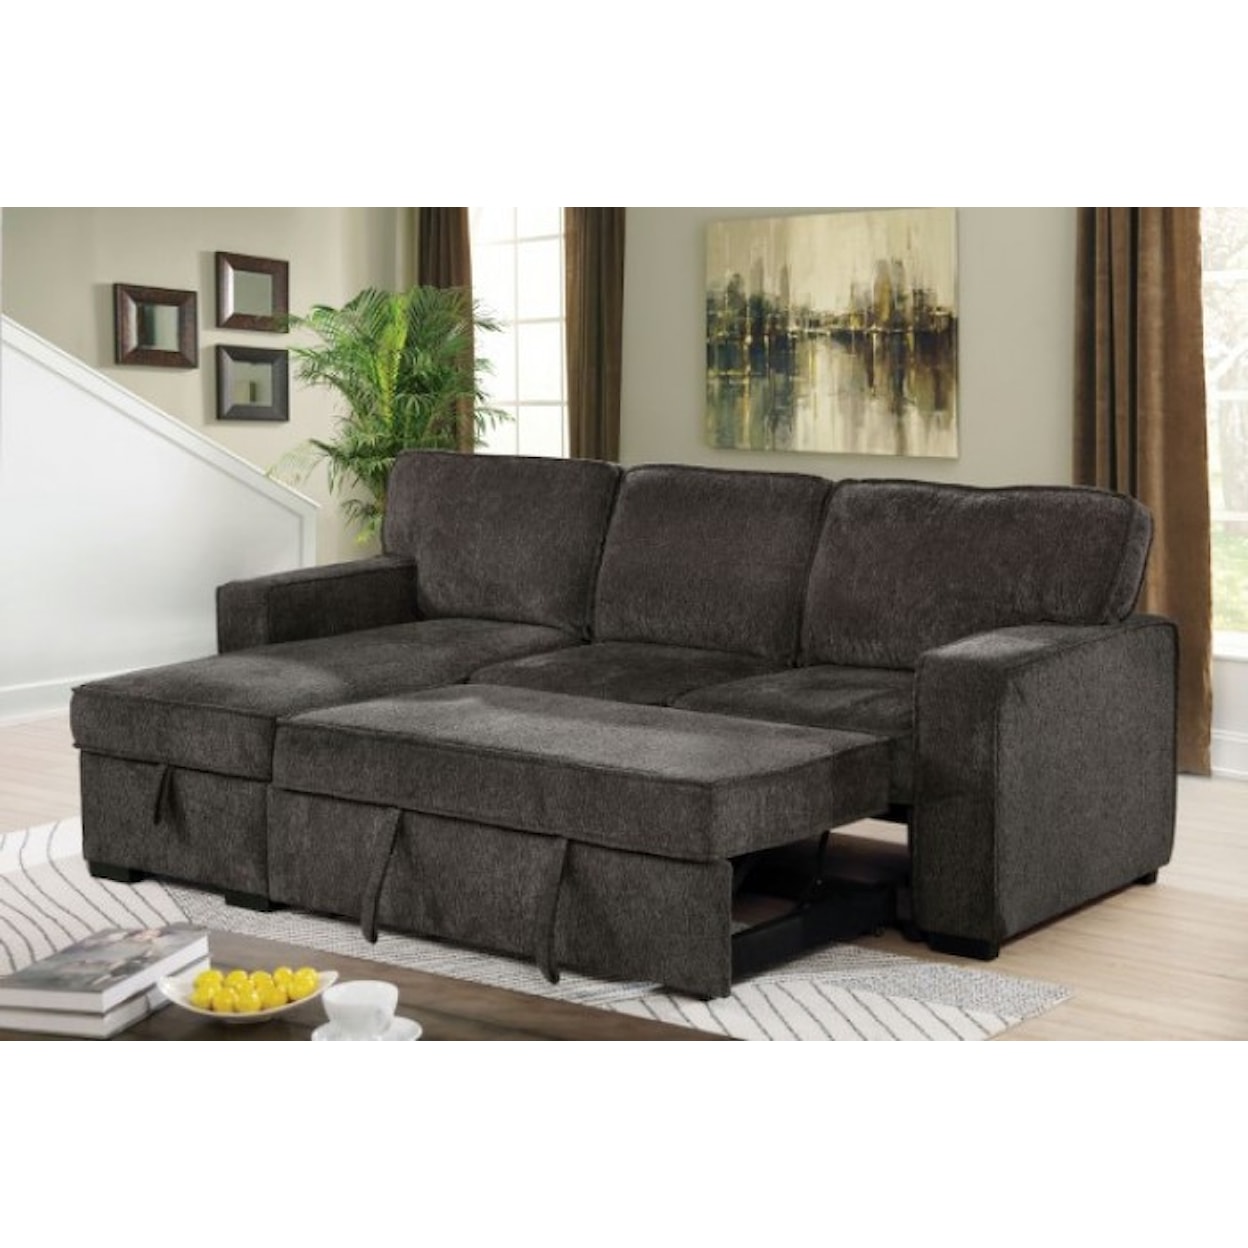 Furniture of America Ines Sectional